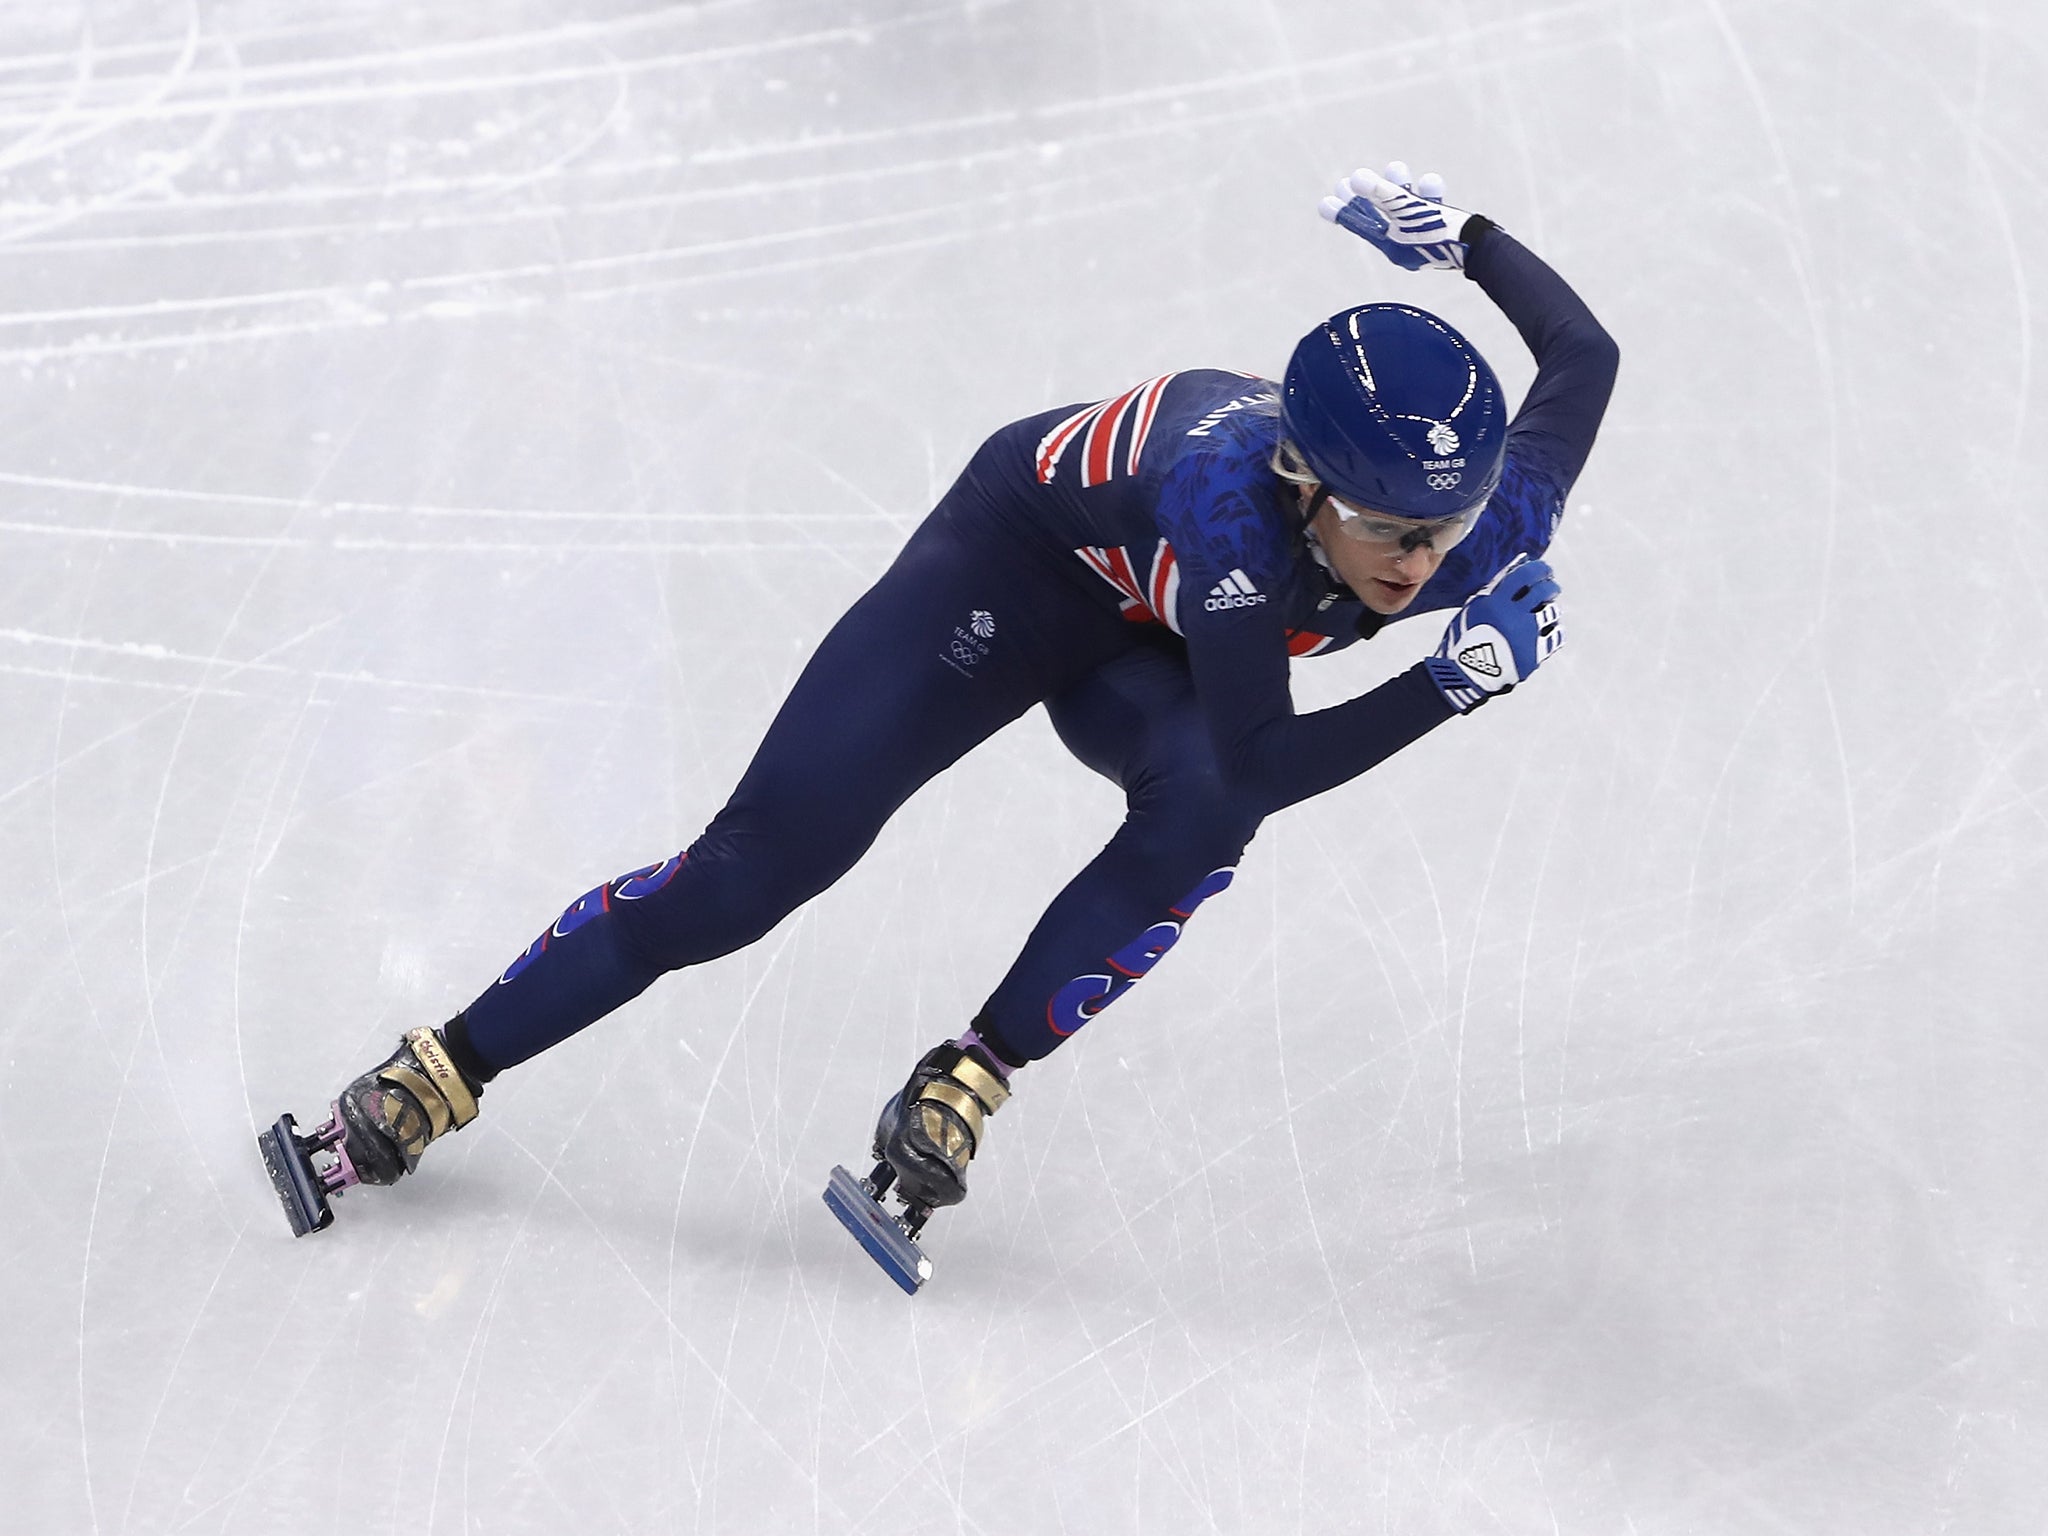 Christie is tipped to claim medals in the 1,000m and 500m short-track speed skating events